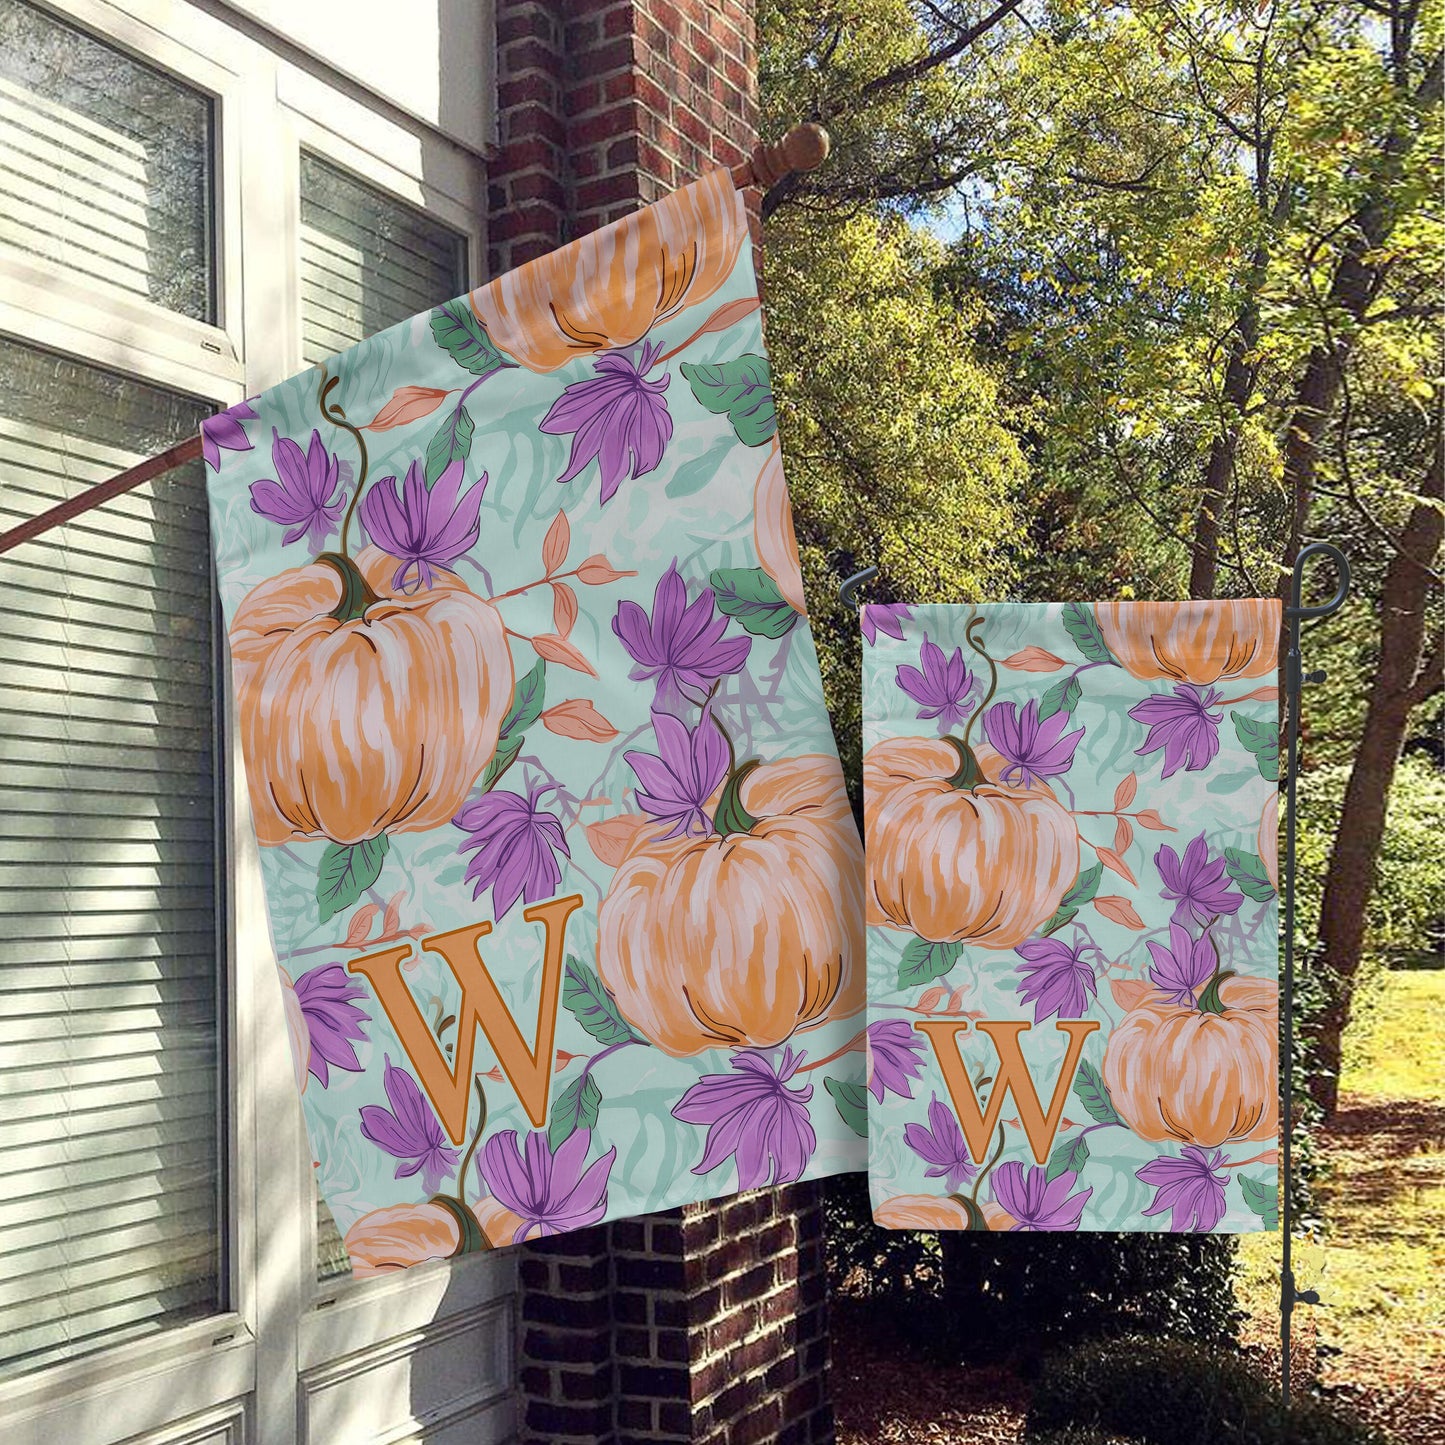 Fall Personalized Flag